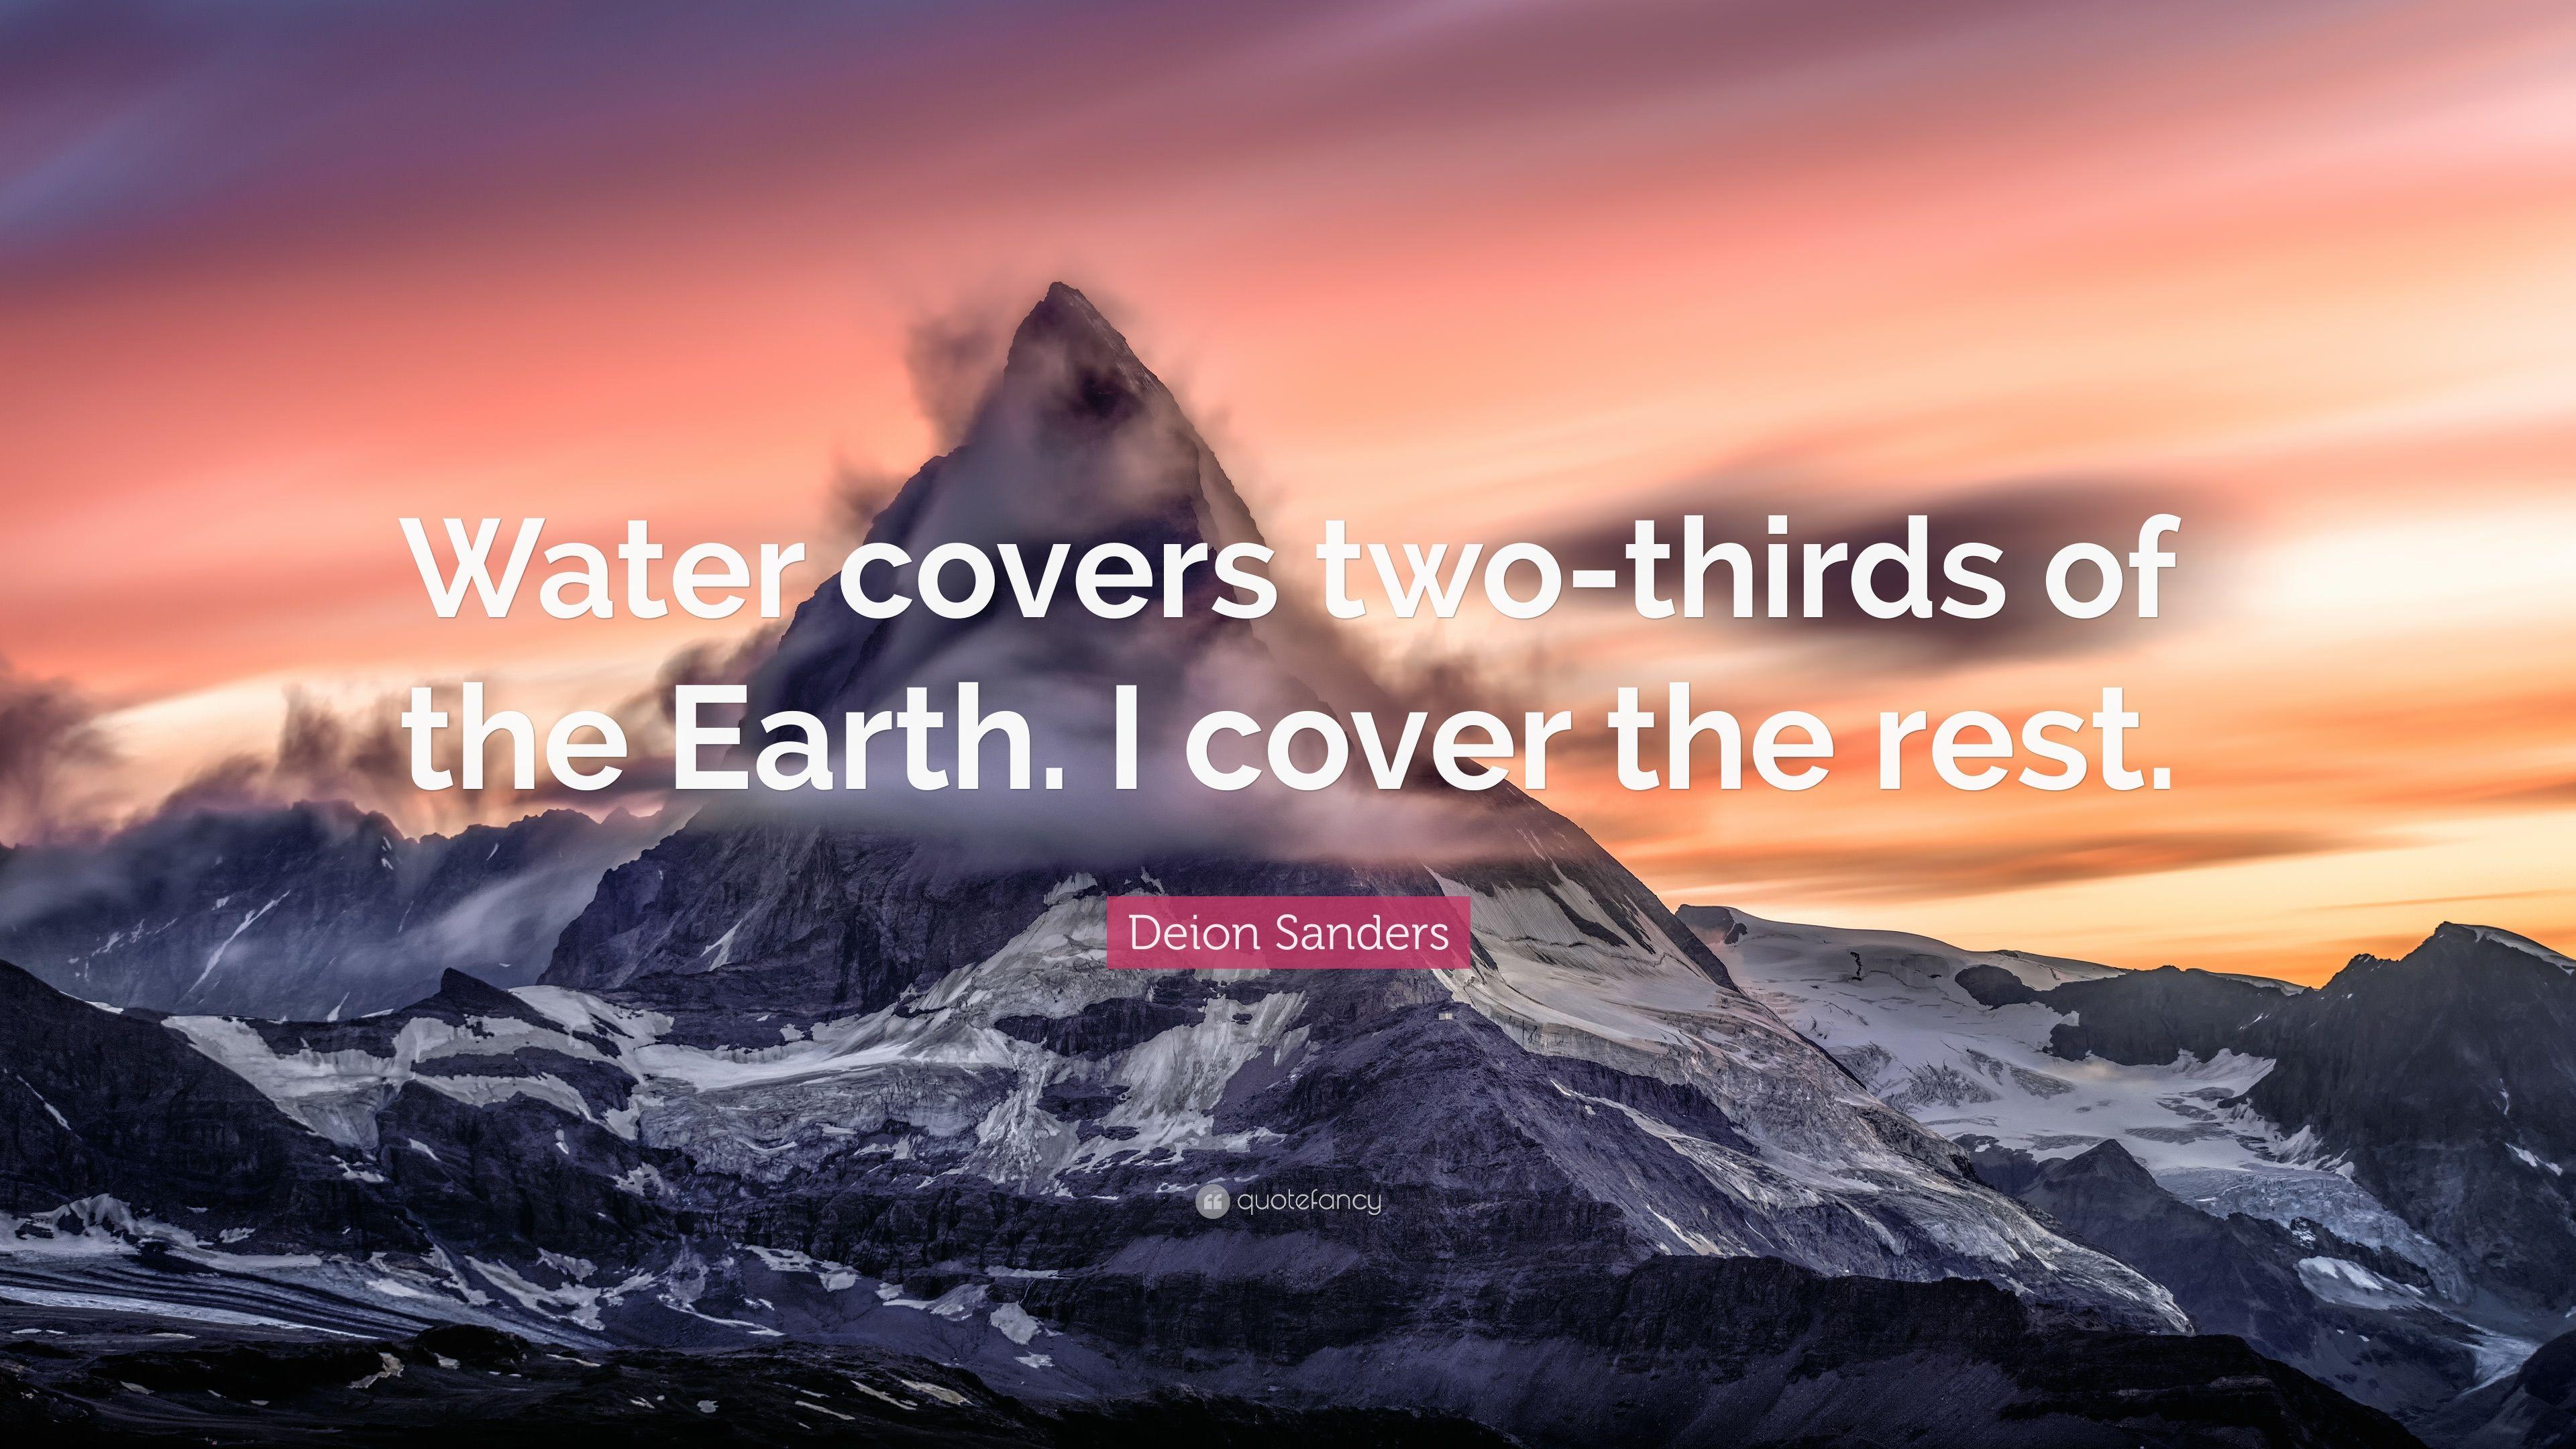 Deion Sanders Quote: “Water Covers Two Thirds Of The Earth. I Cover